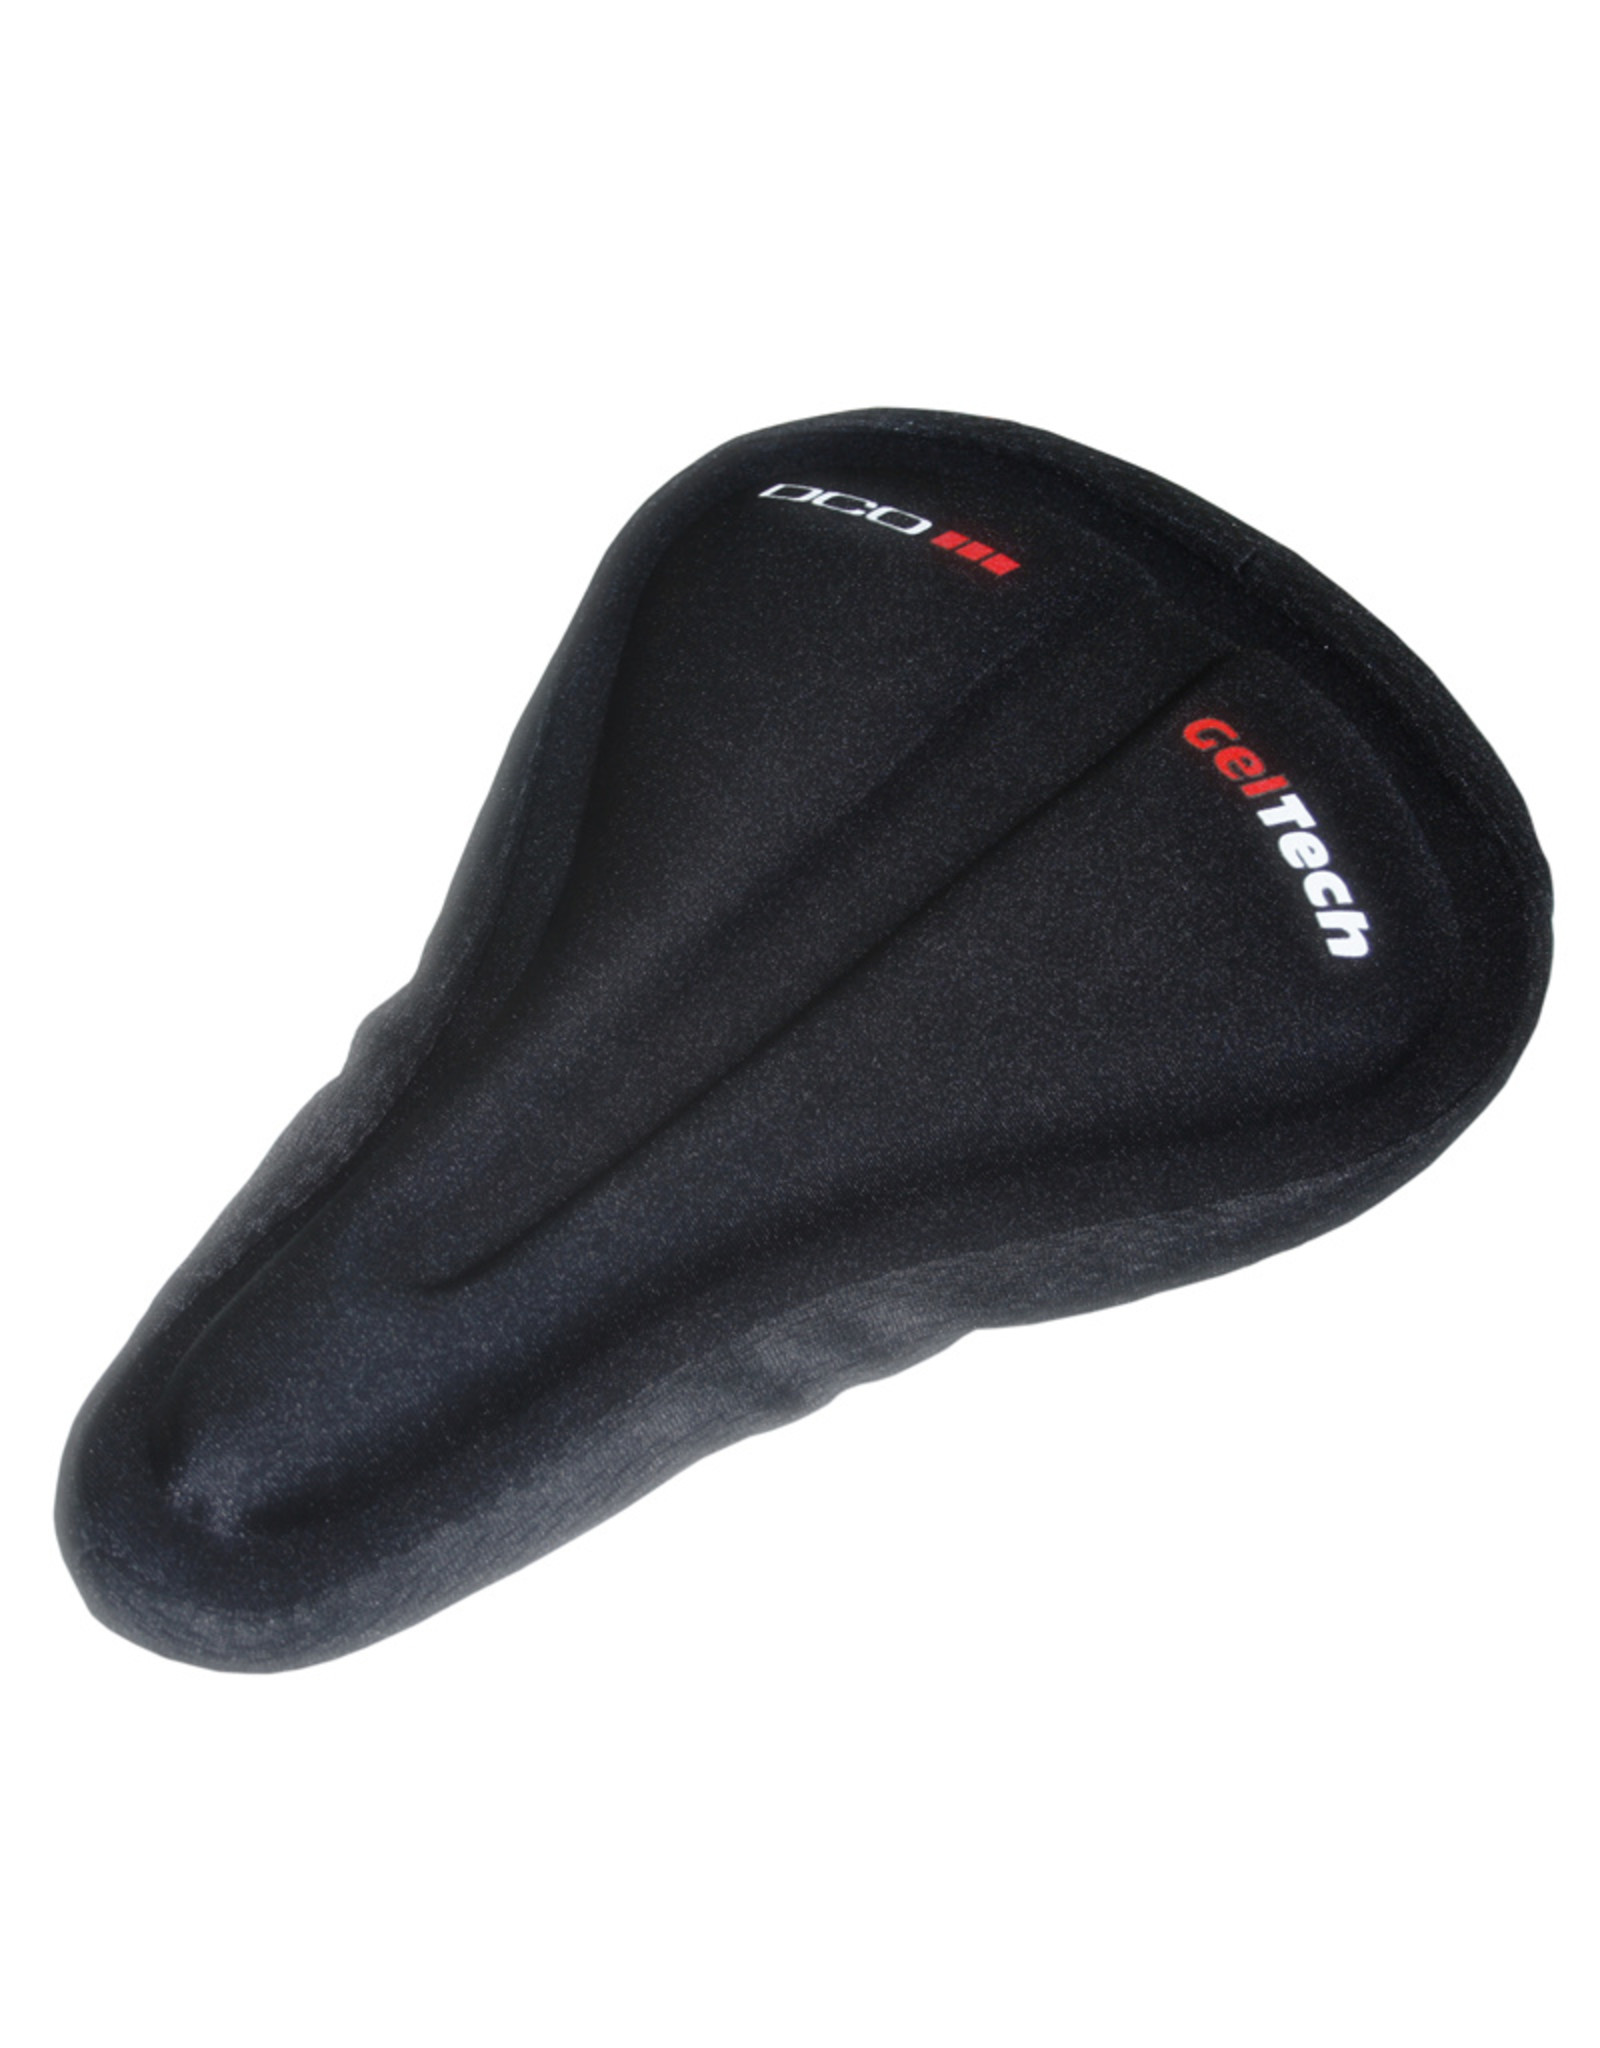 DCO DCO Gel Seat Cover